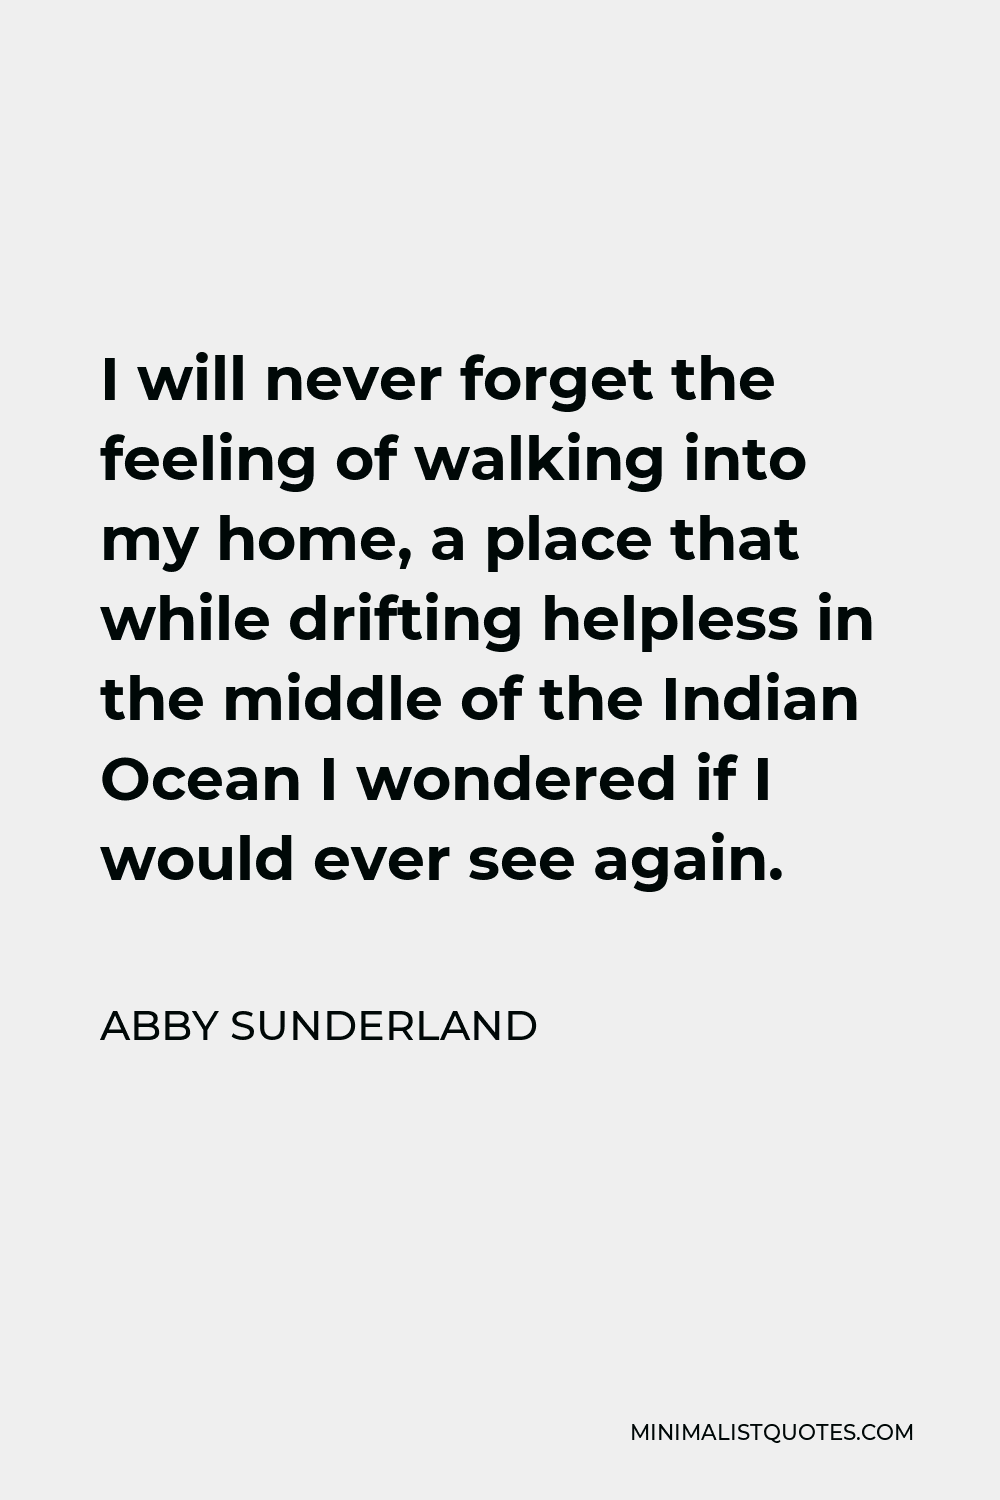 Abby Sunderland Quote - I will never forget the feeling of walking into my home, a place that while drifting helpless in the middle of the Indian Ocean I wondered if I would ever see again.